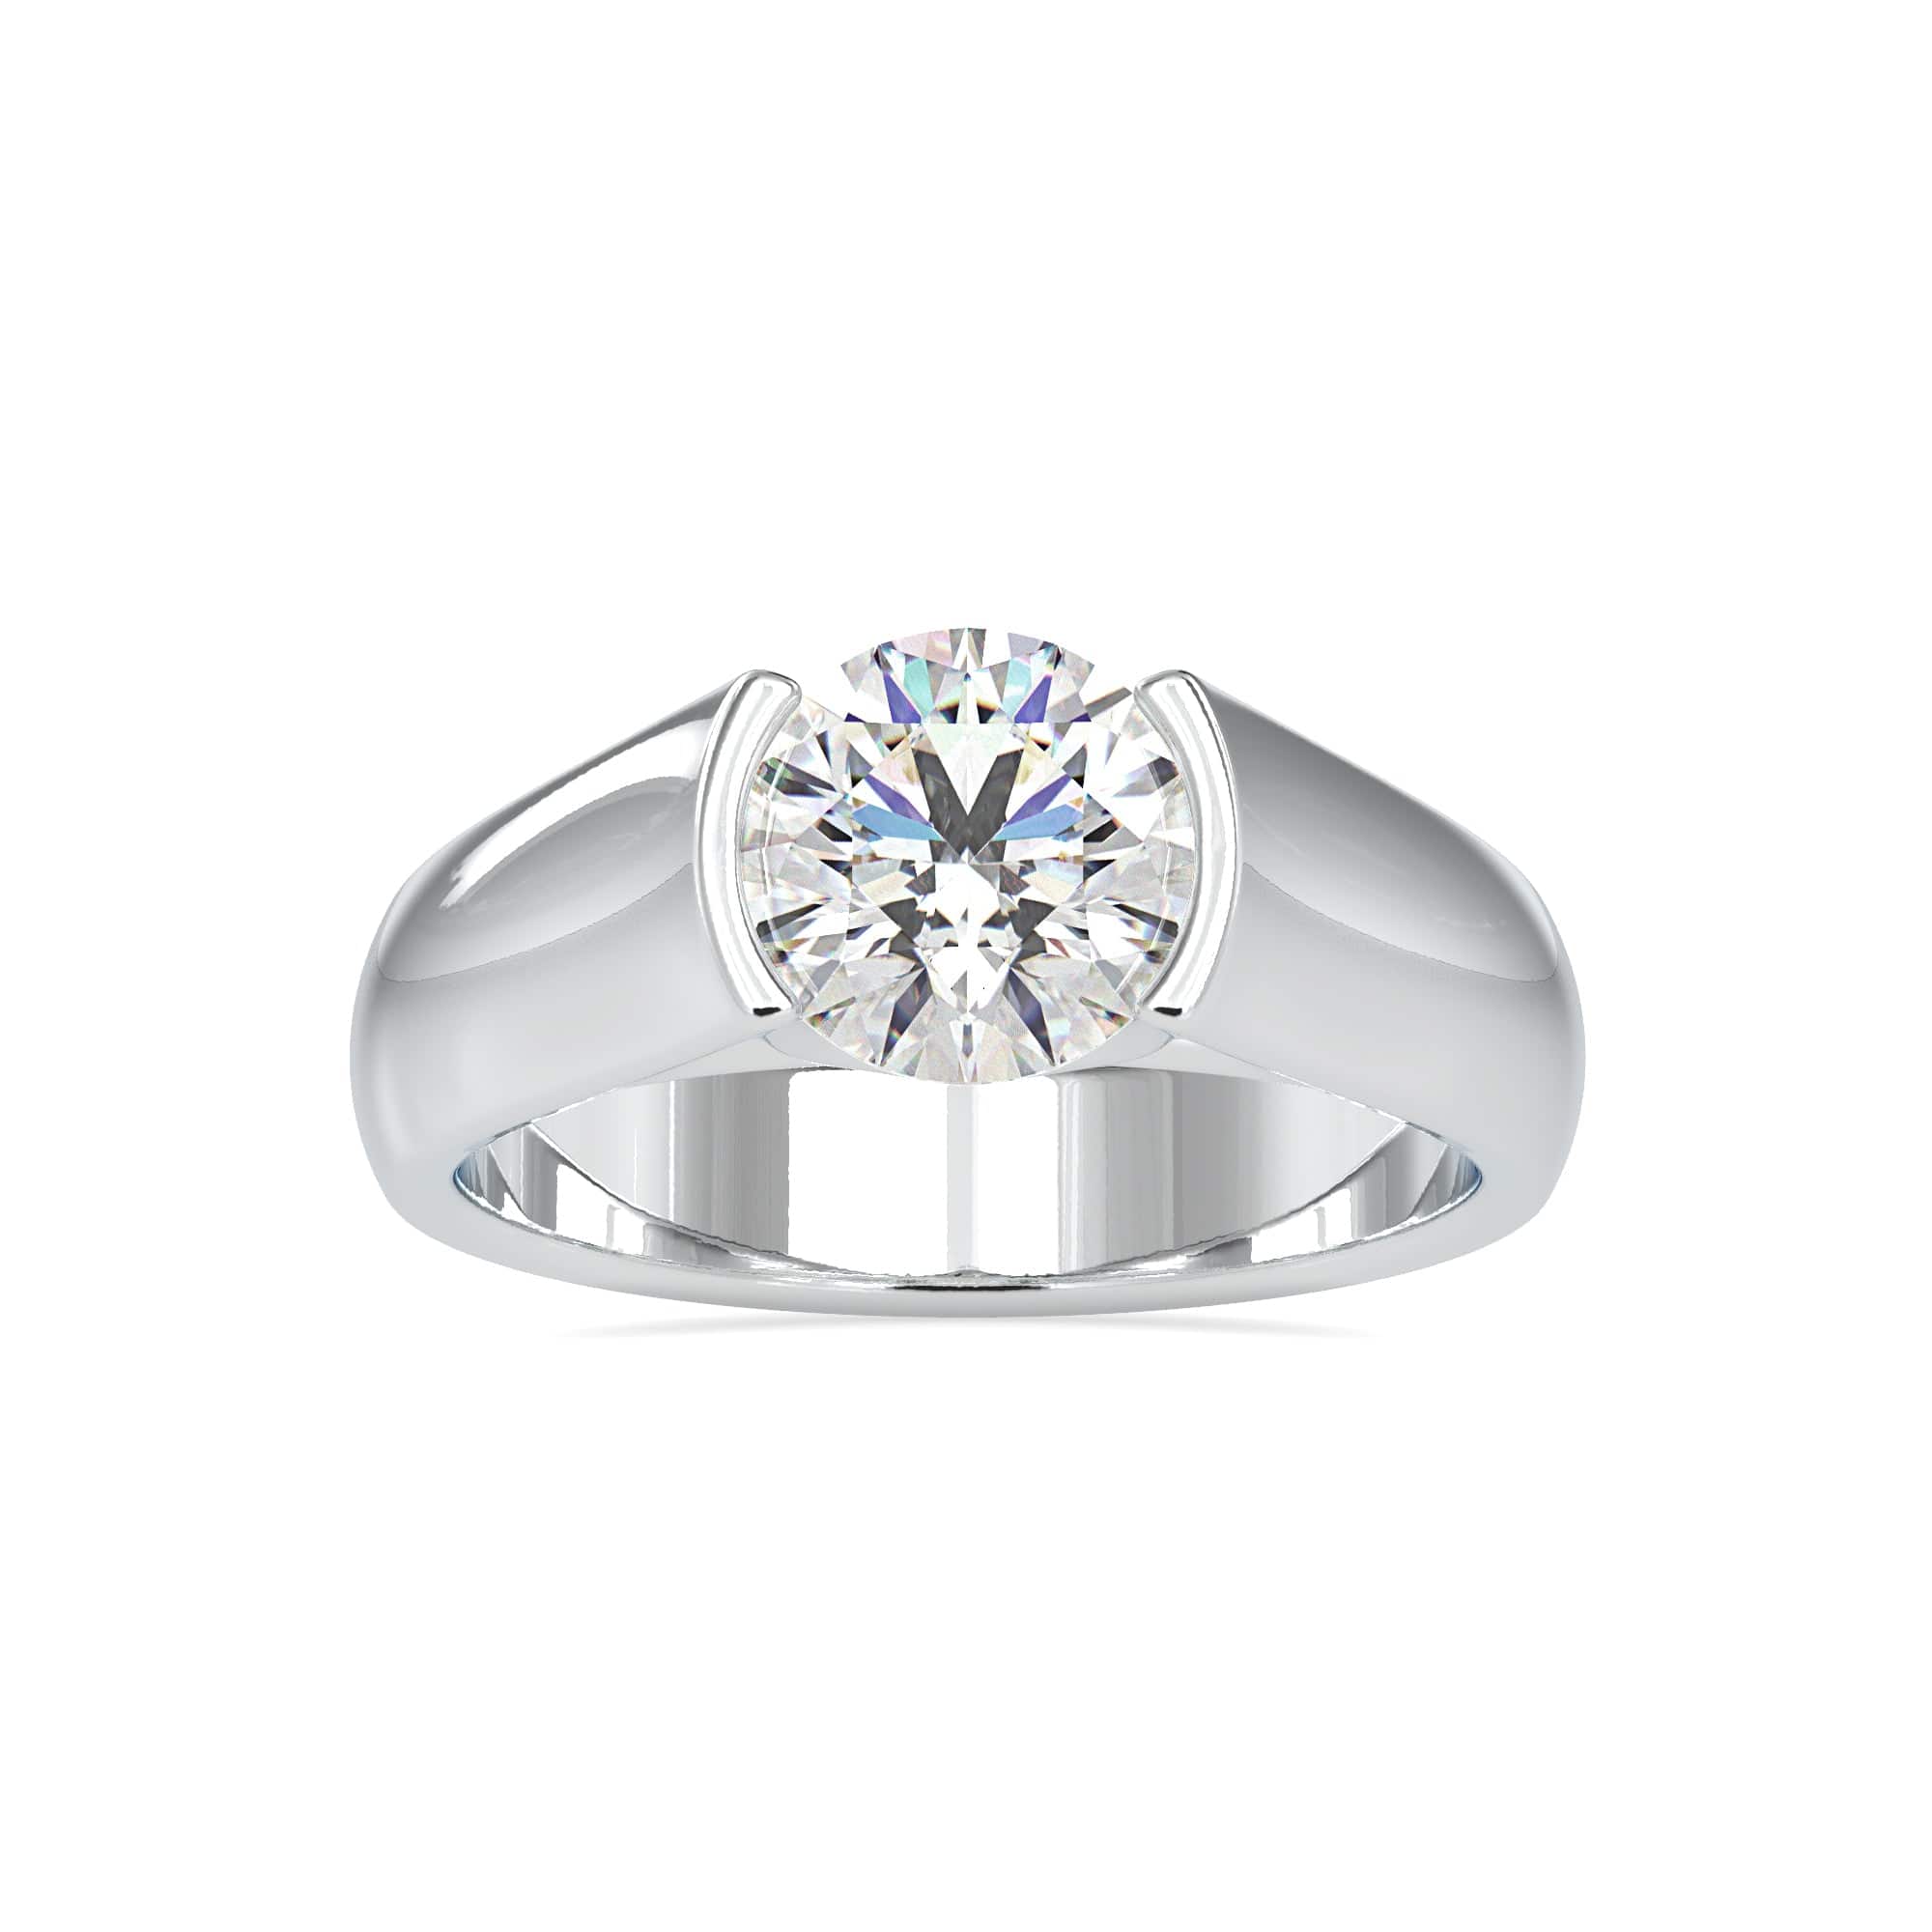 Buy Platinum Engagement Ring in India | Chungath Jewellery Online- Rs.  36,370.00